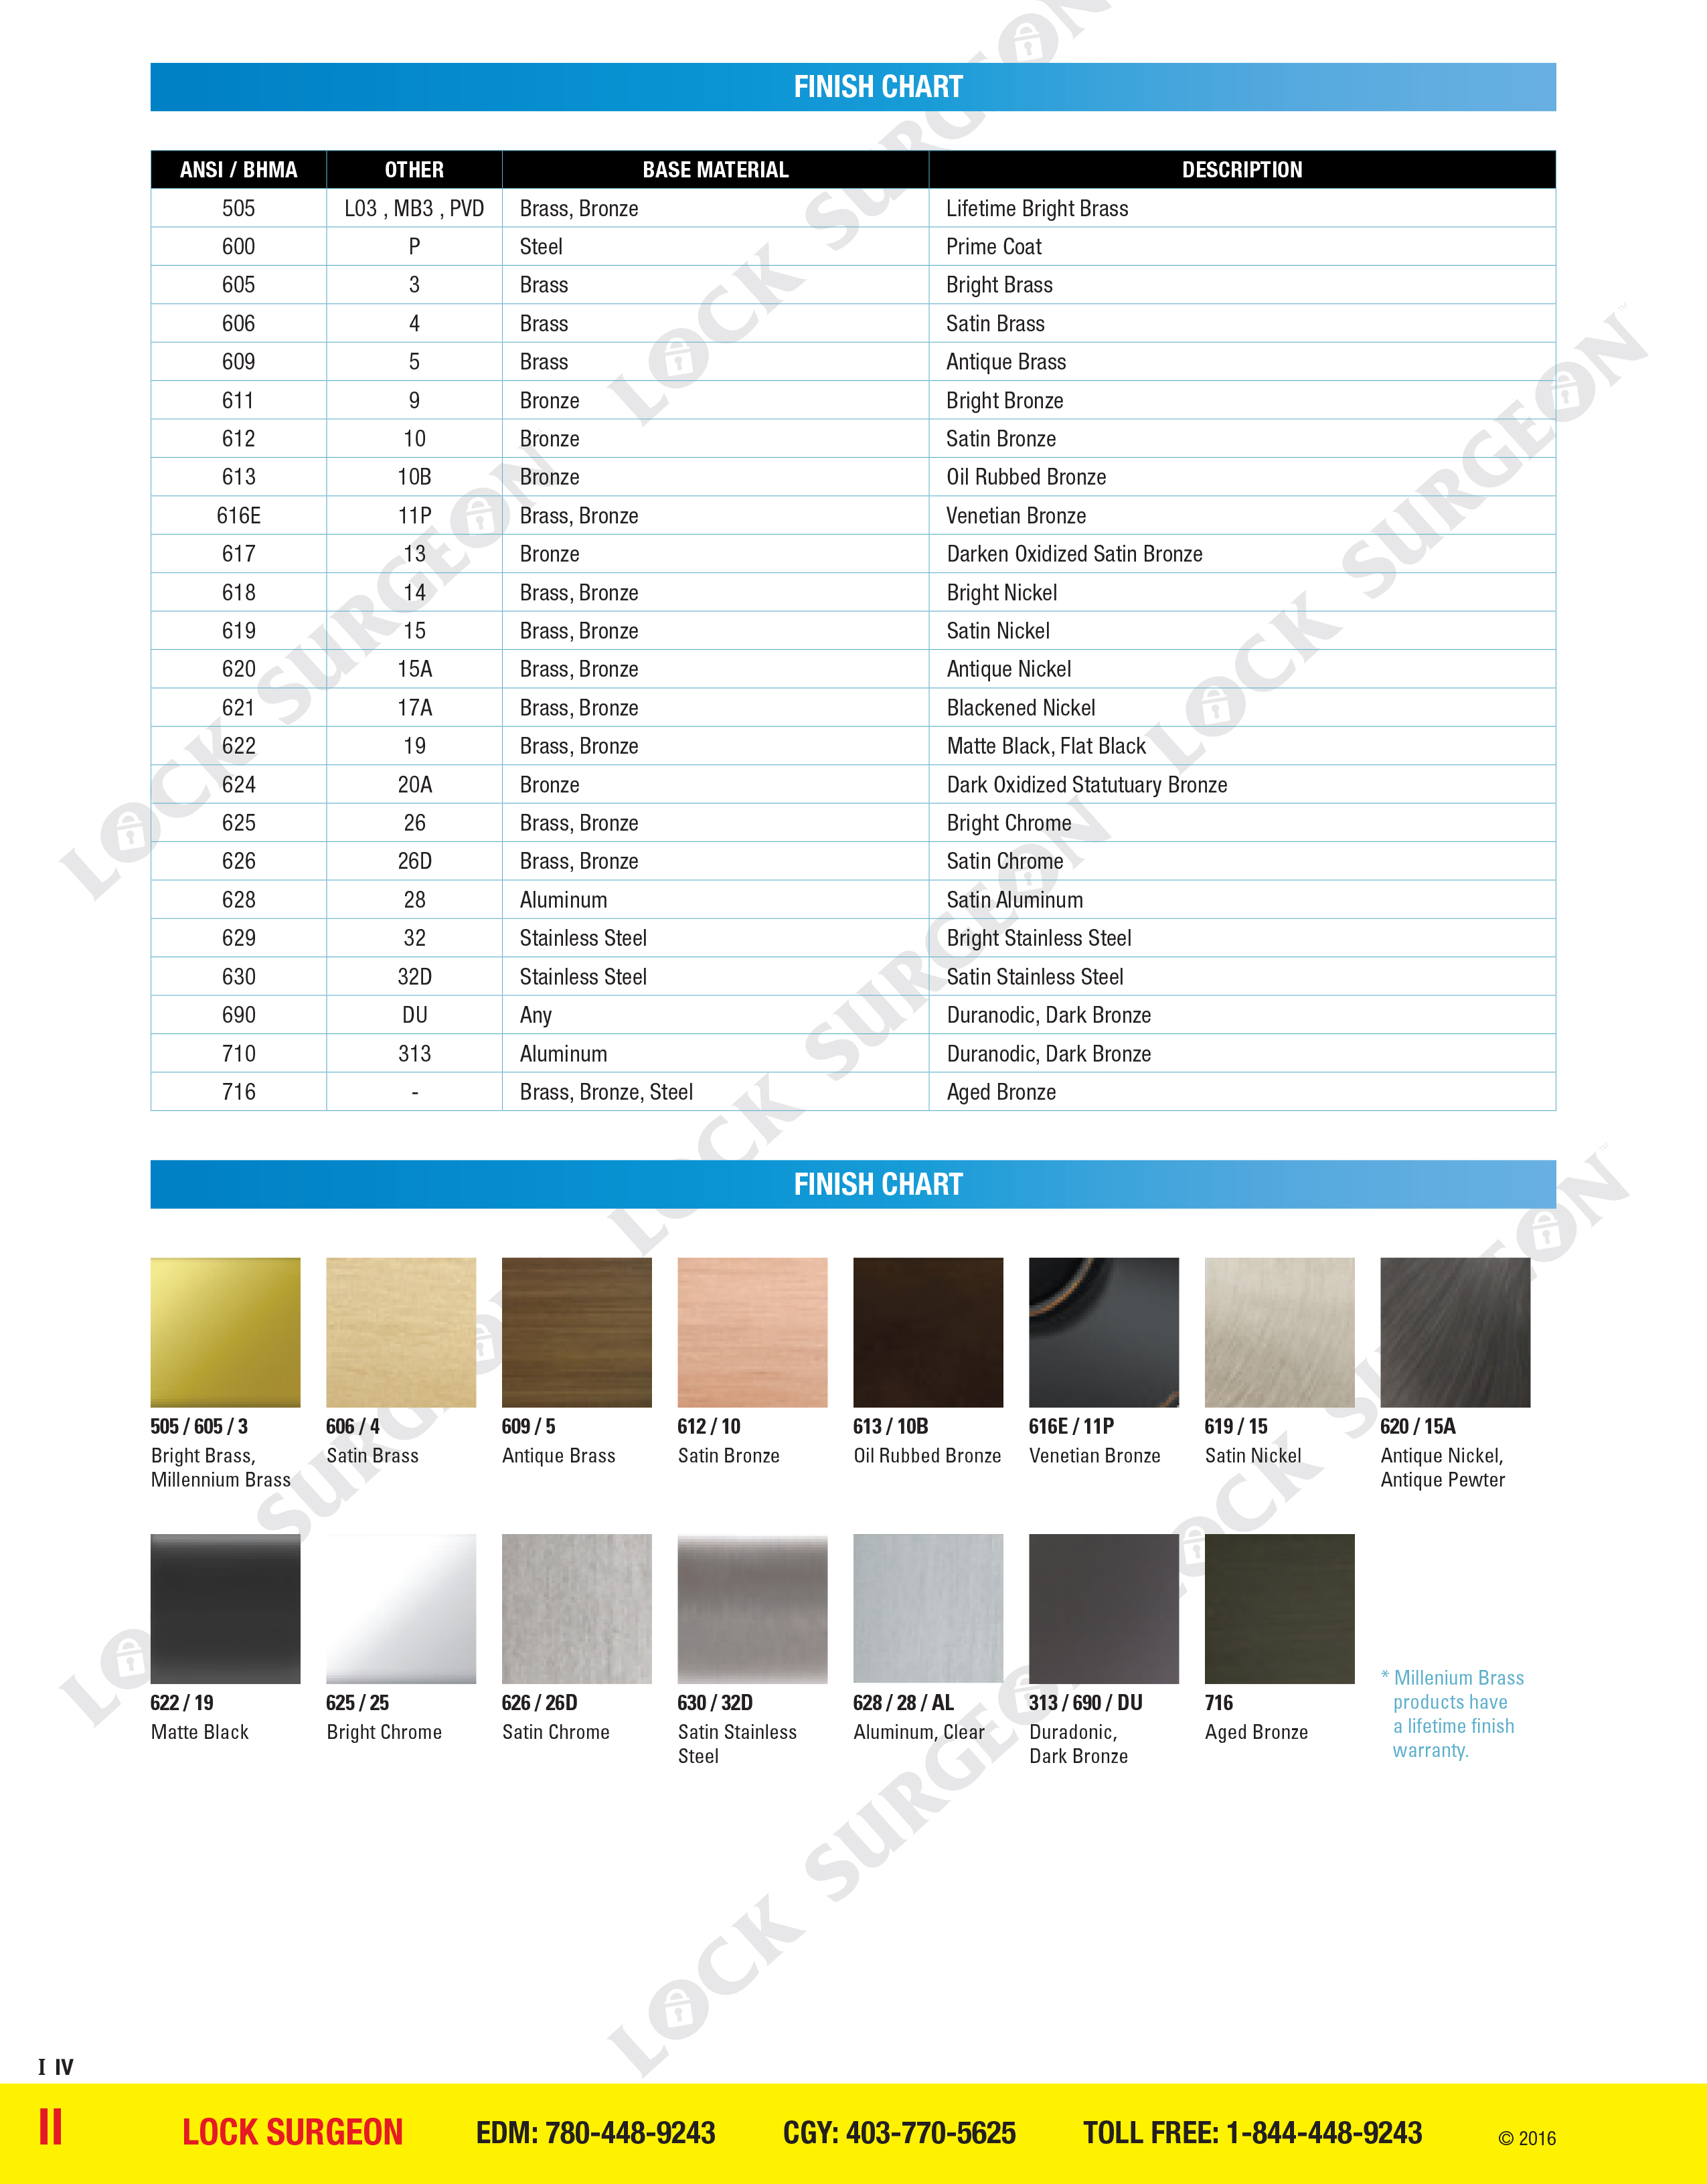 Colour reference chart for colour finishes on door handle hardware products Devon.